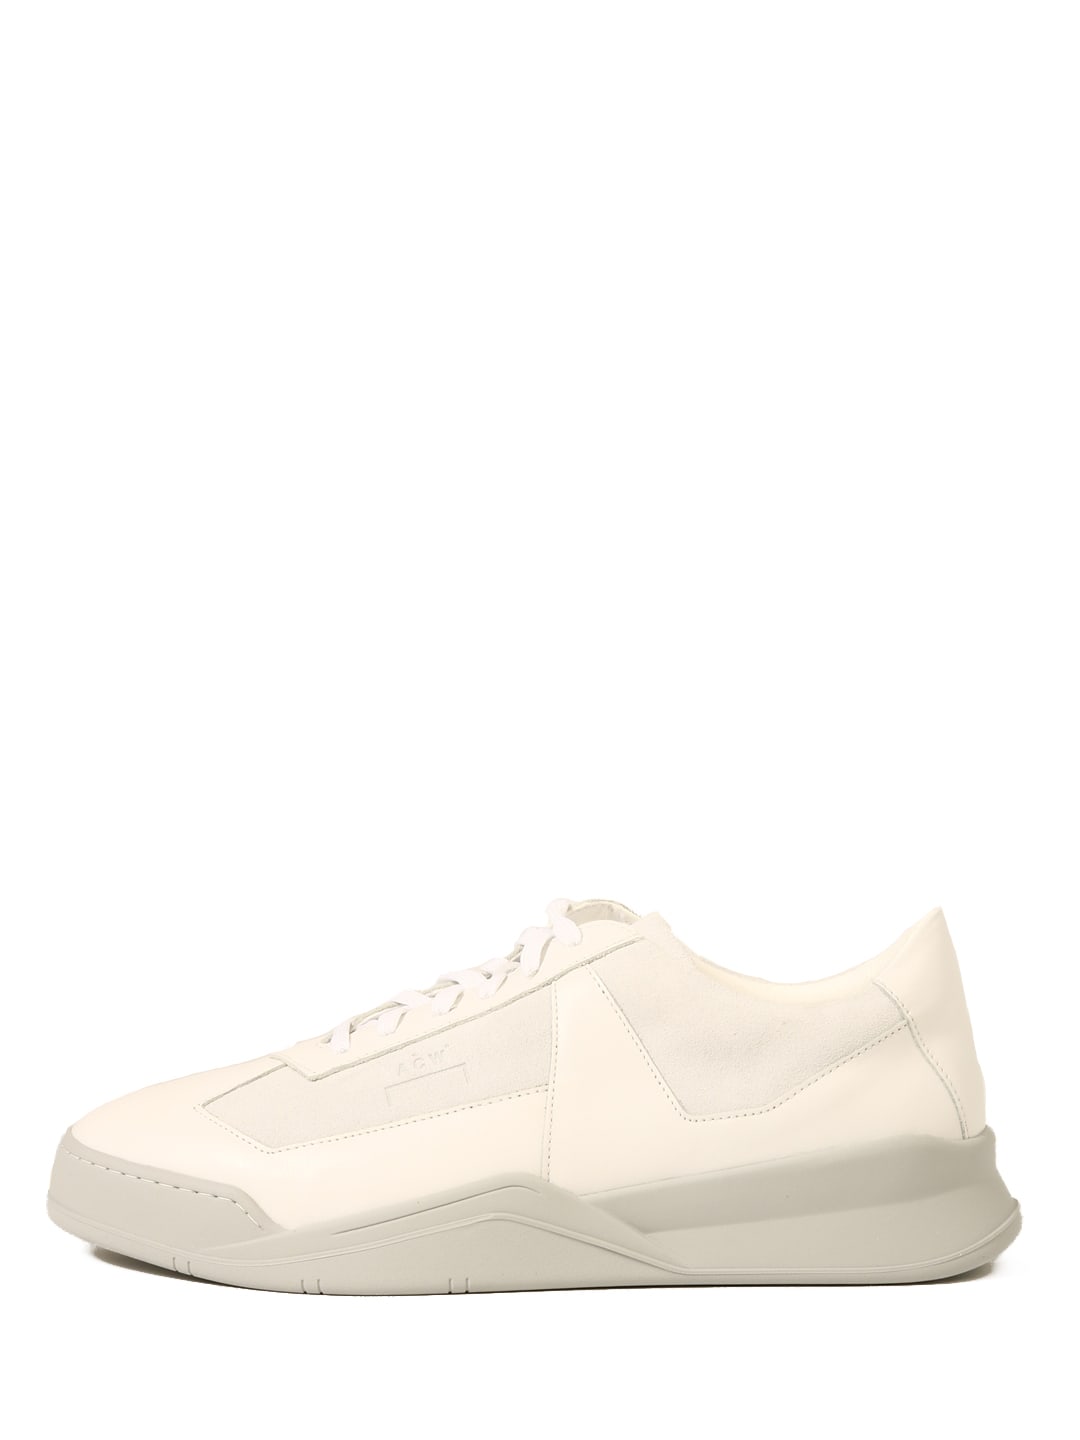 A-COLD-WALL* LEATHER SNEAKERS WHITE,11286640